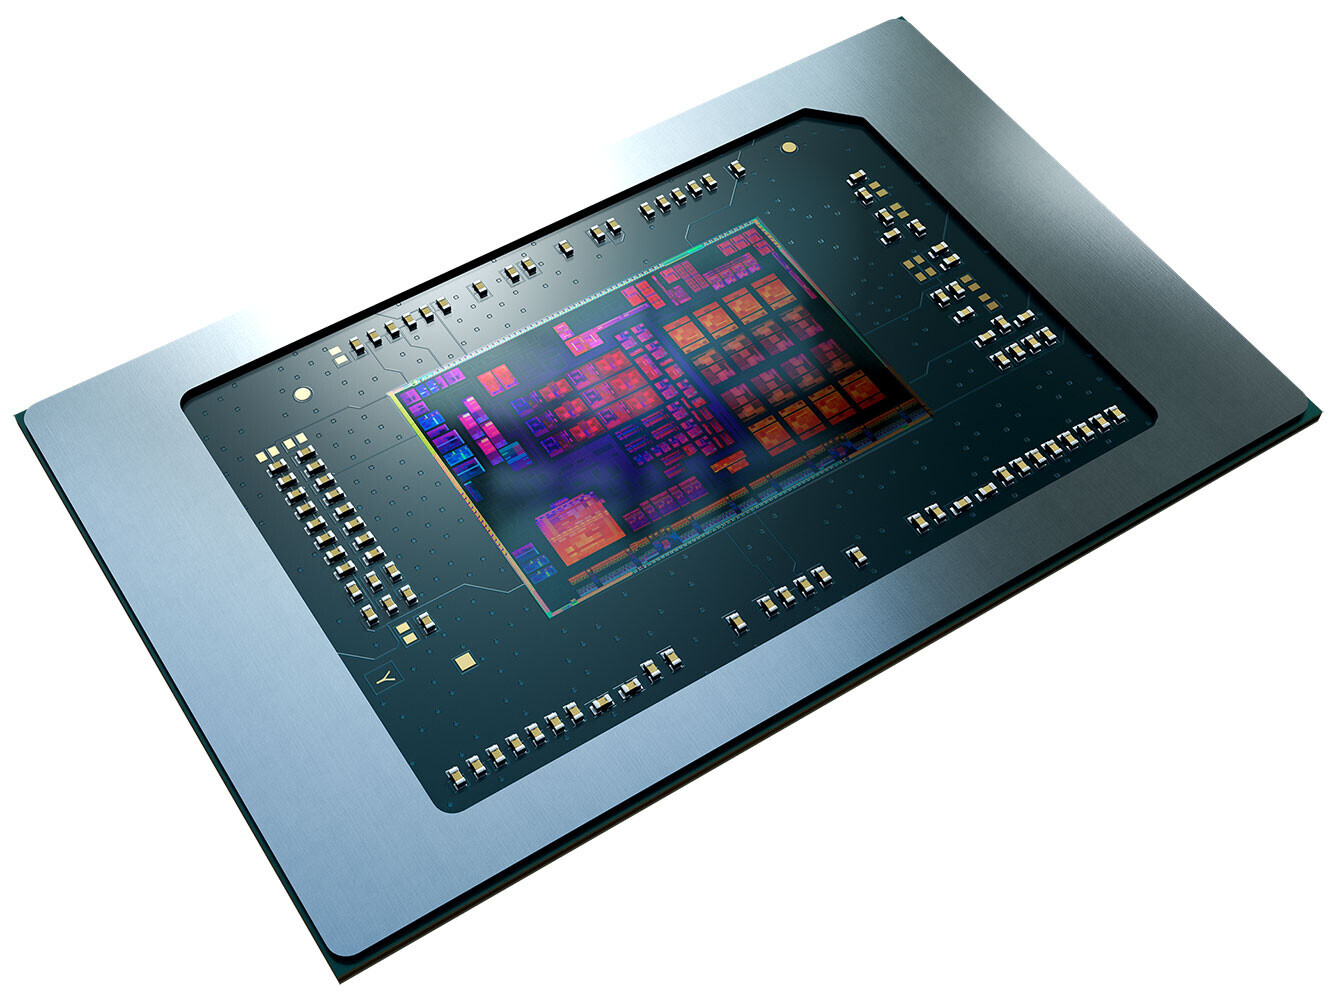 AMD Launches Ryzen 5 7500F in China: Zen 4 With no Integrated Graphics